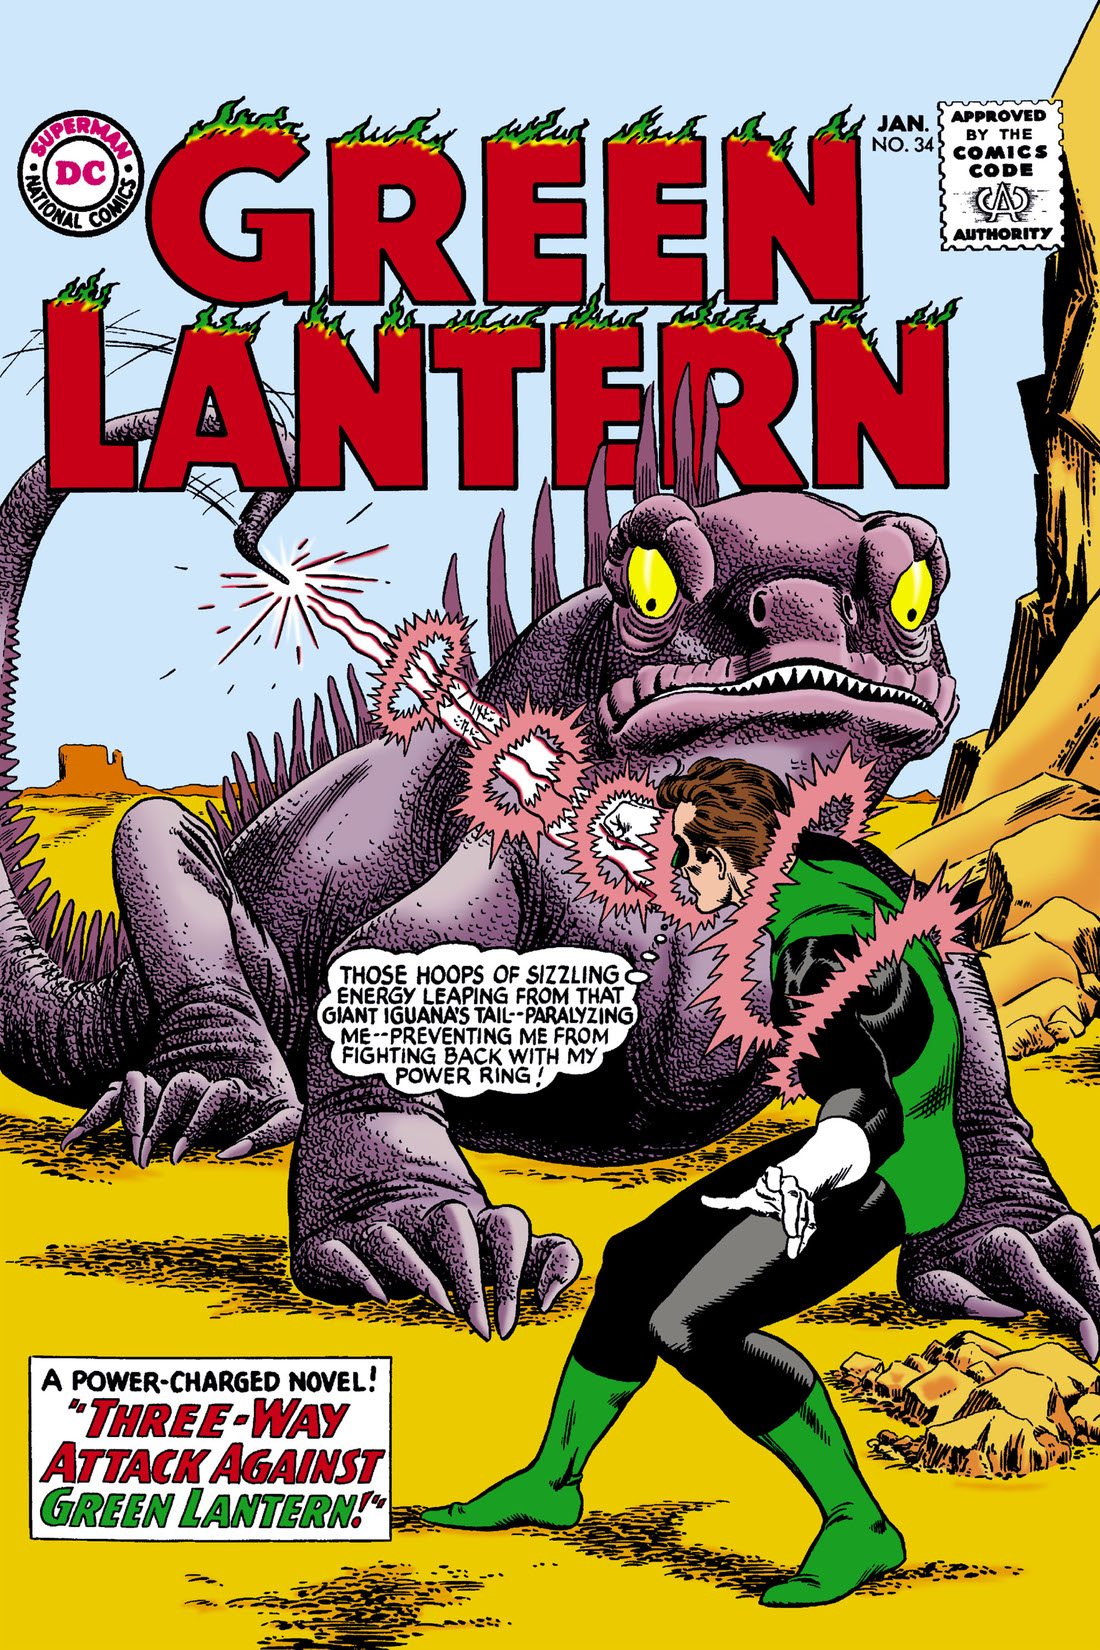 Green Lantern (1960-) #34 preview images